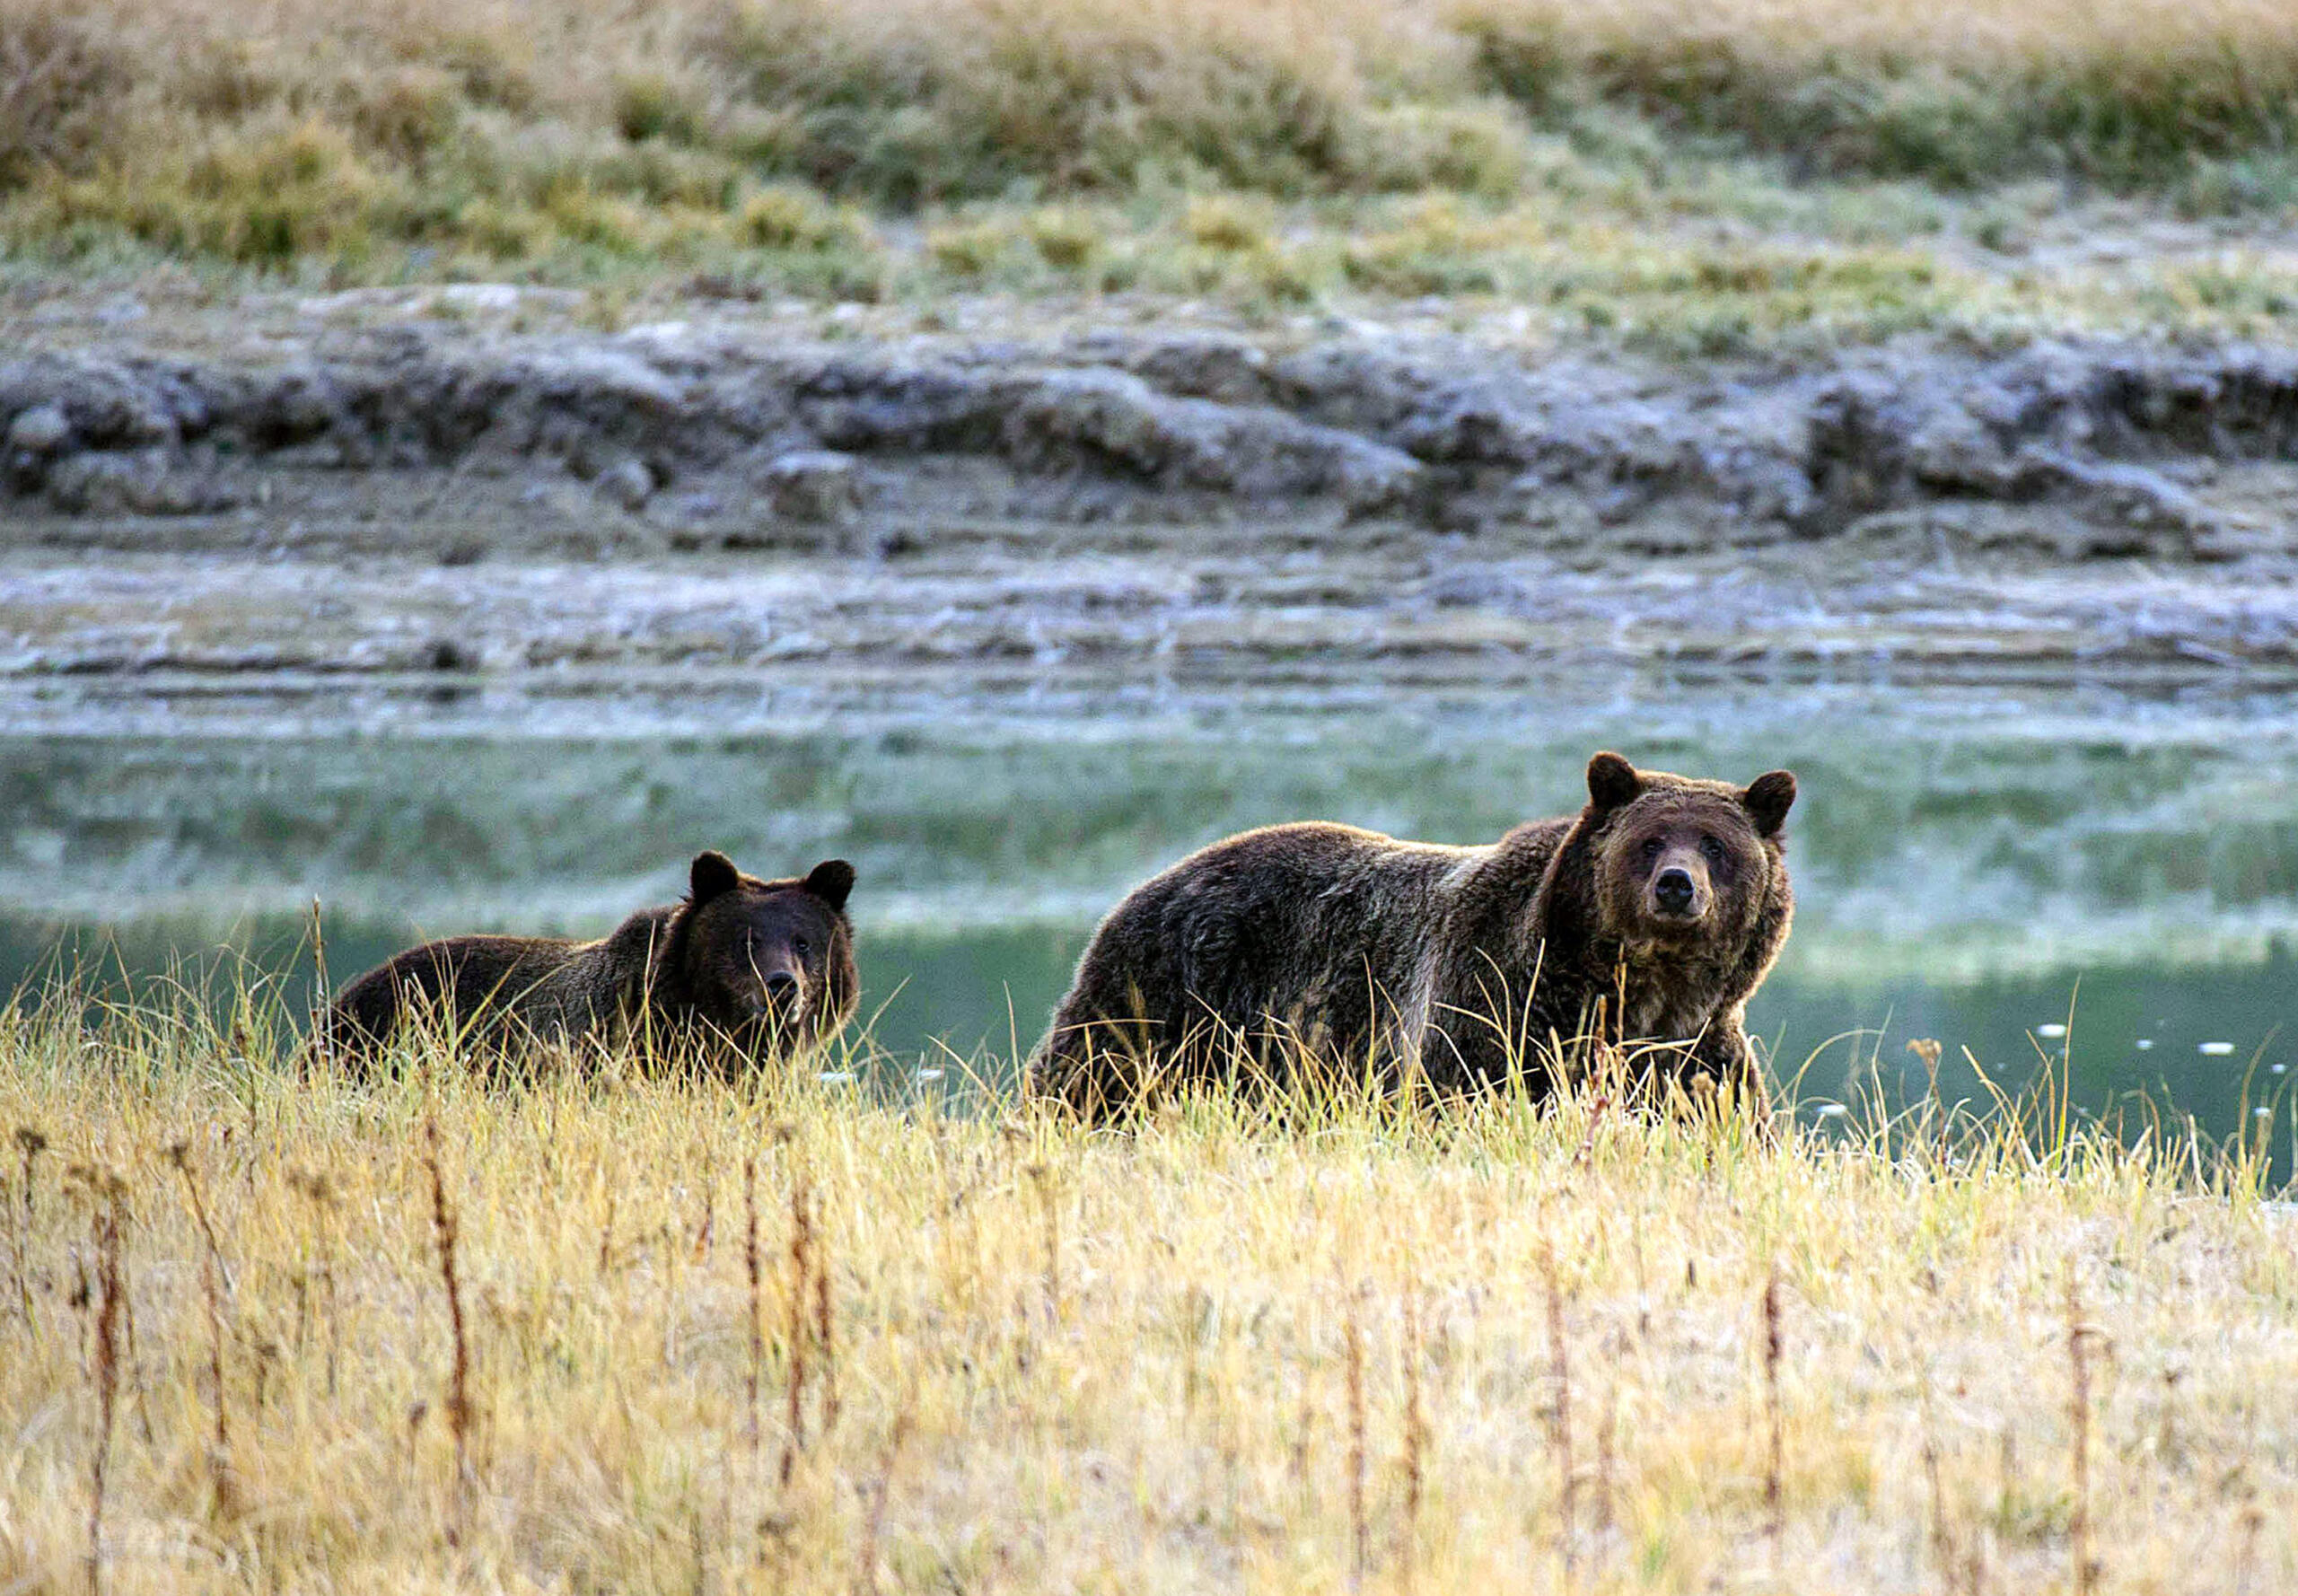 A Grizzly bear mother and her cub walk near Pelican Creek Oct. 8, 2012, in the Yellowstone National Park in Wyoming.